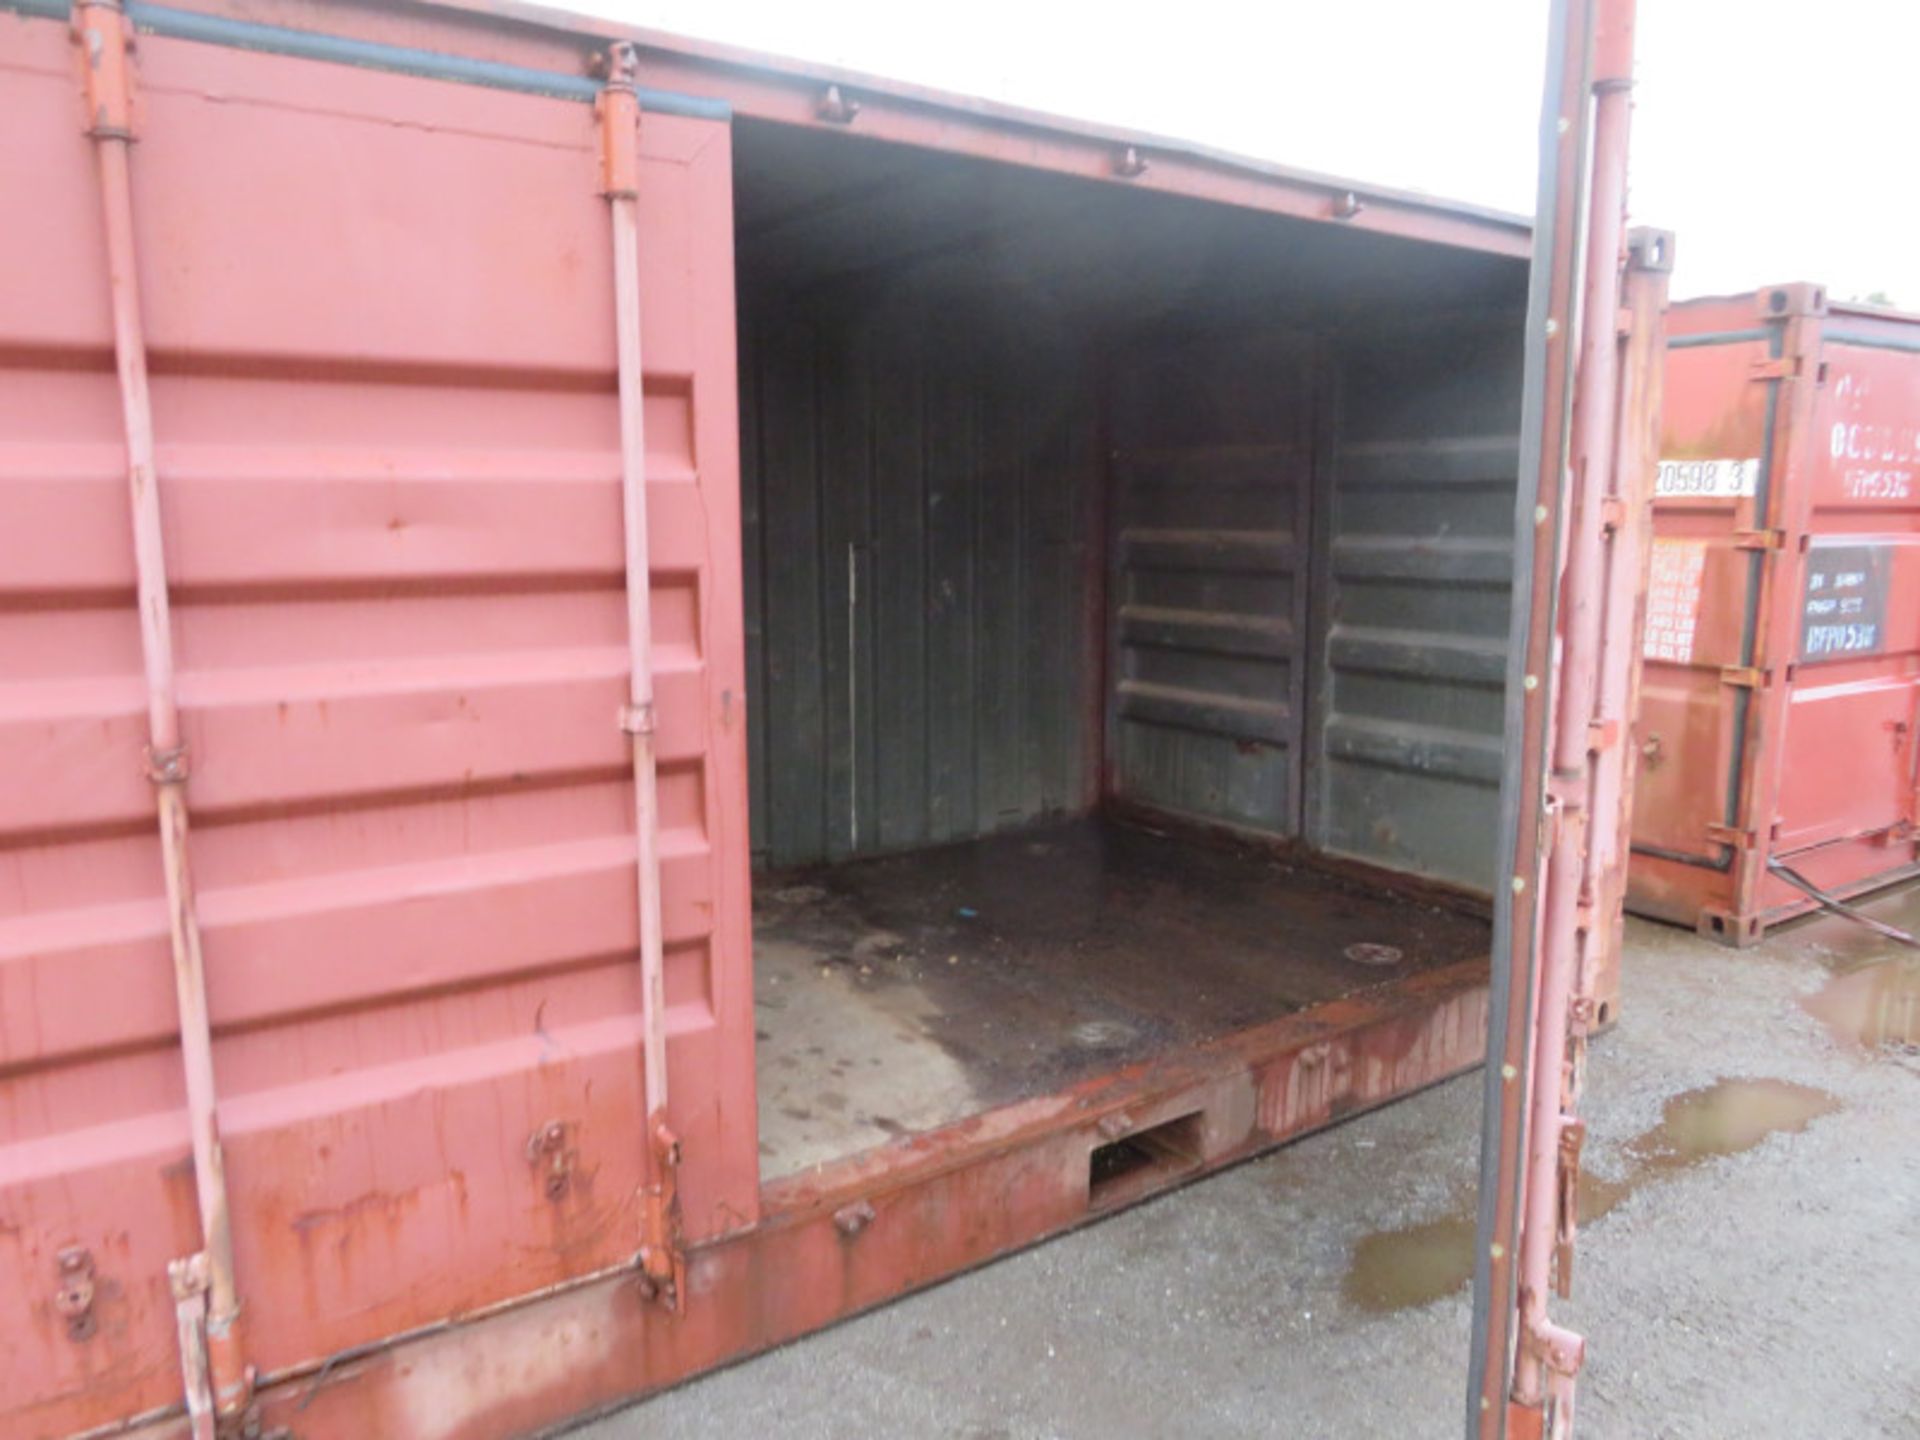 20ft Side and end opening Iso container - 8ft x 8ft x 20ft External Dimensions (Rust marks - Image 3 of 7